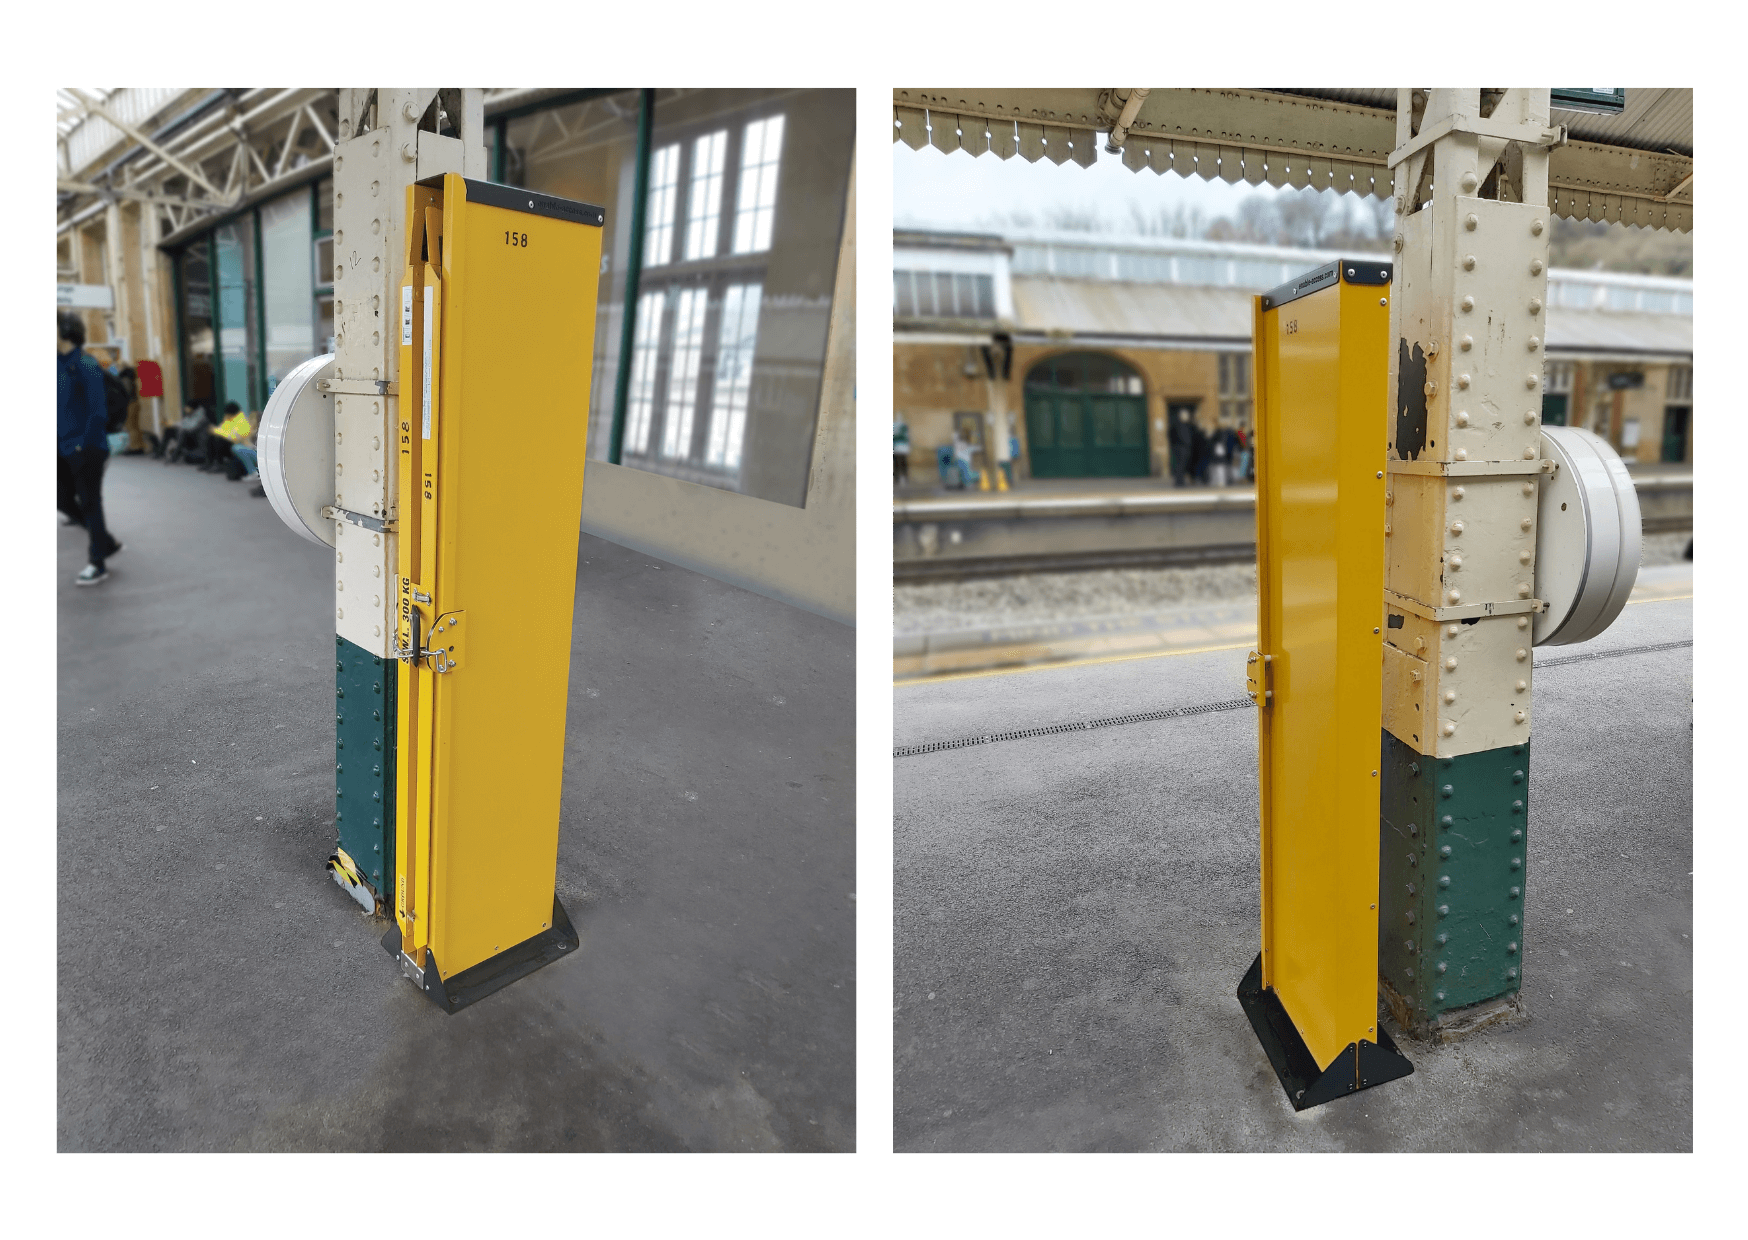 Rail ramp vertical storage unit on station platform from different angles